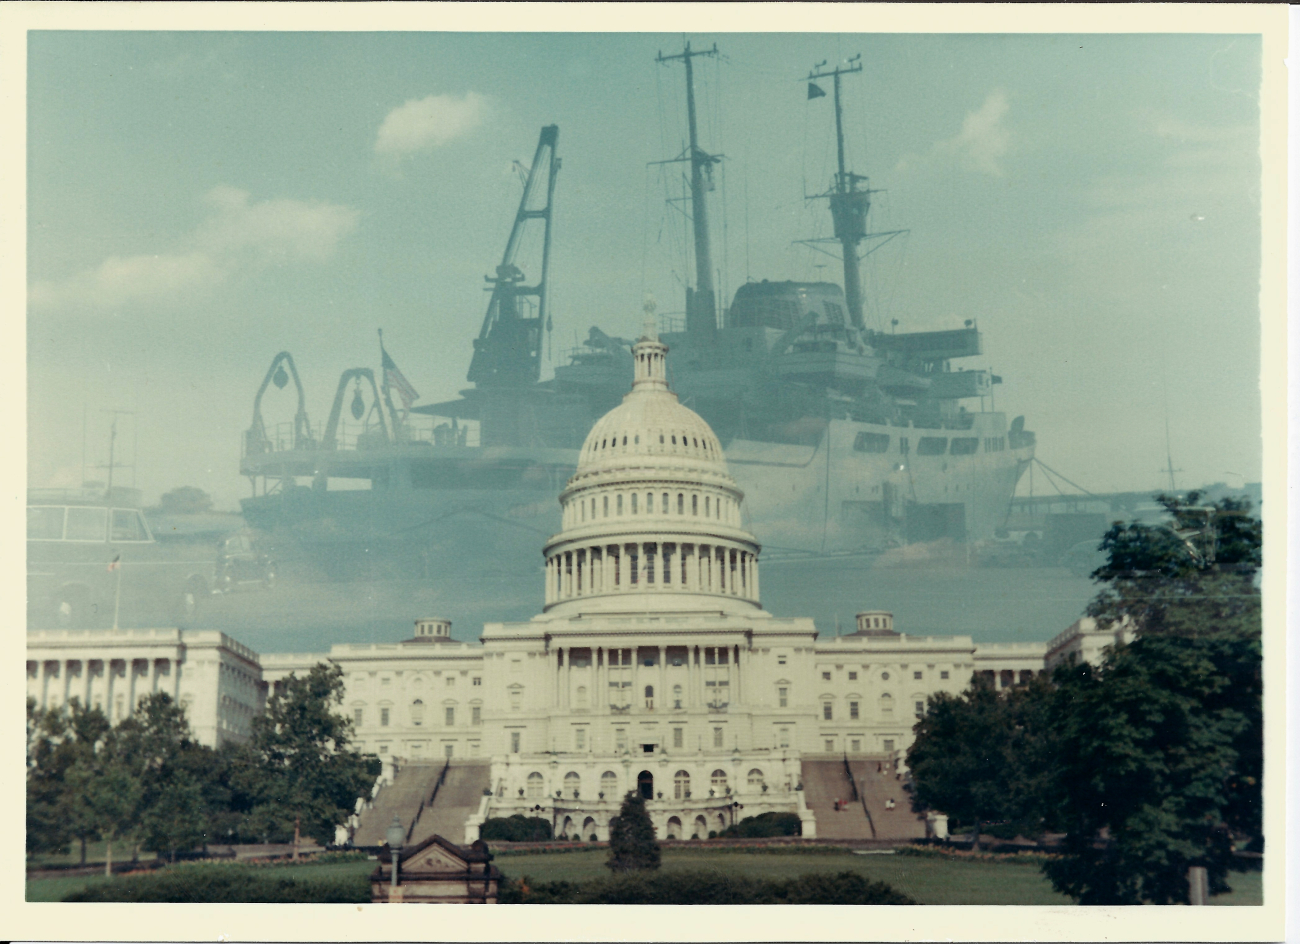 Picture of the OCEANOGRAPHER superimposed over the United States CapitolBuilding